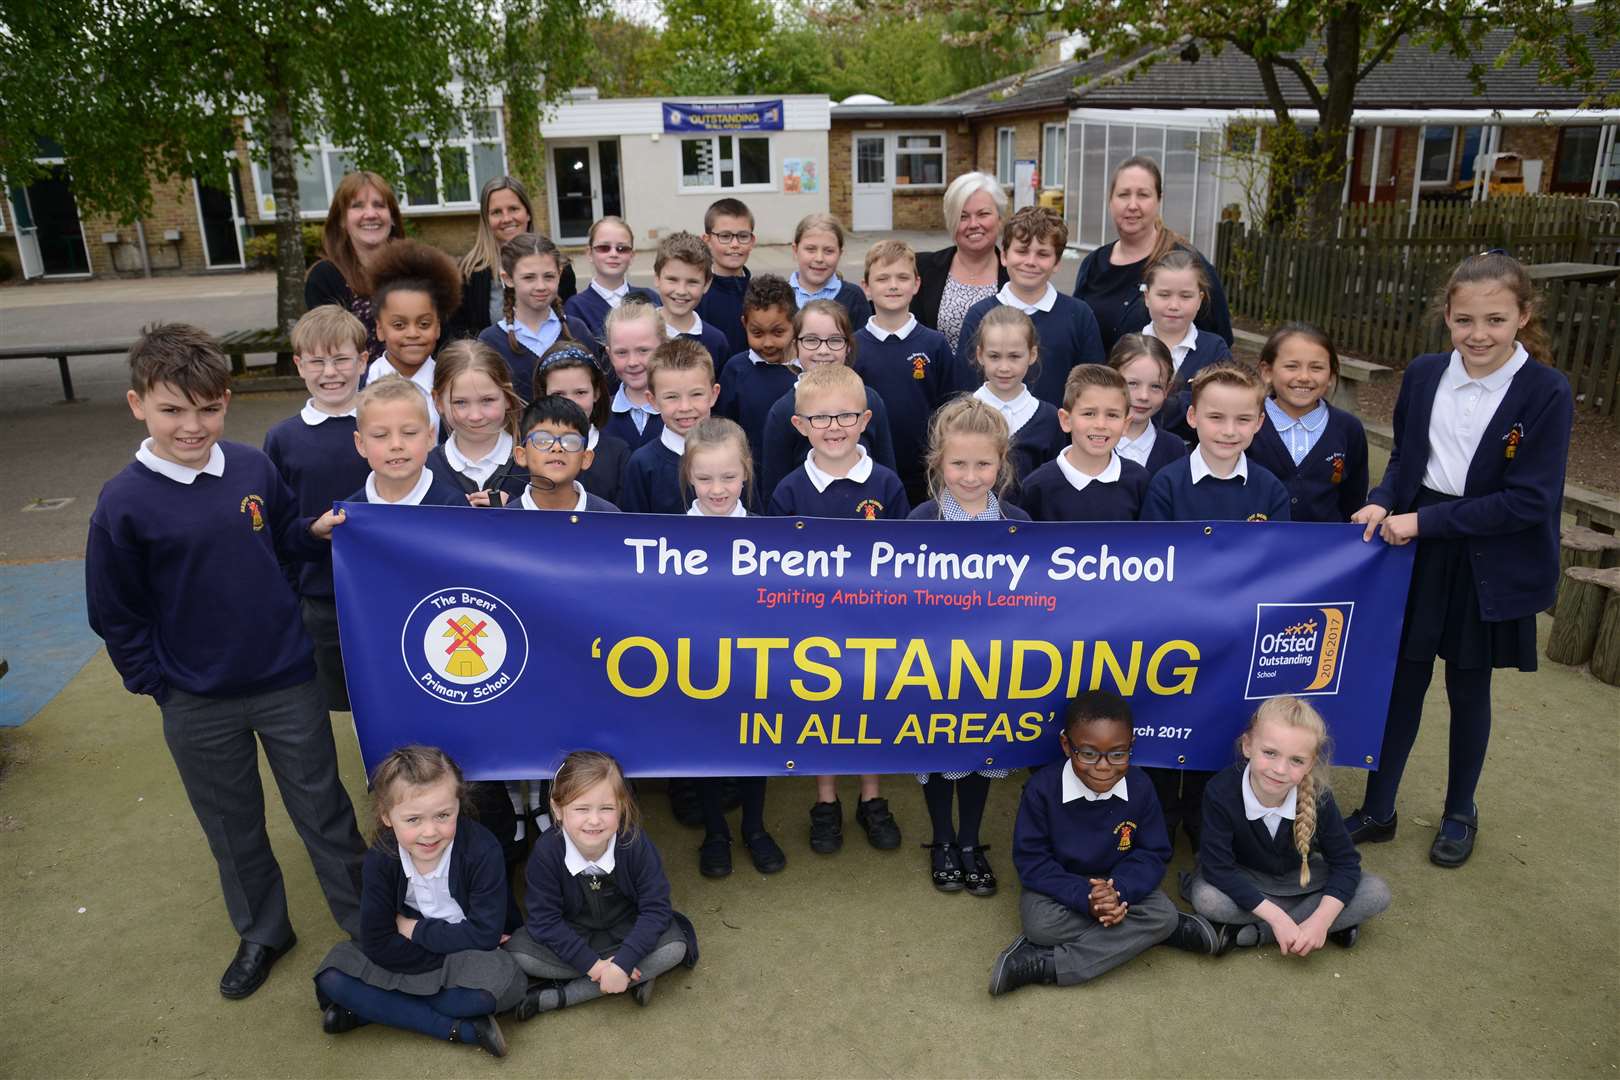 Staff and pupils The Brent Primary School celebrating